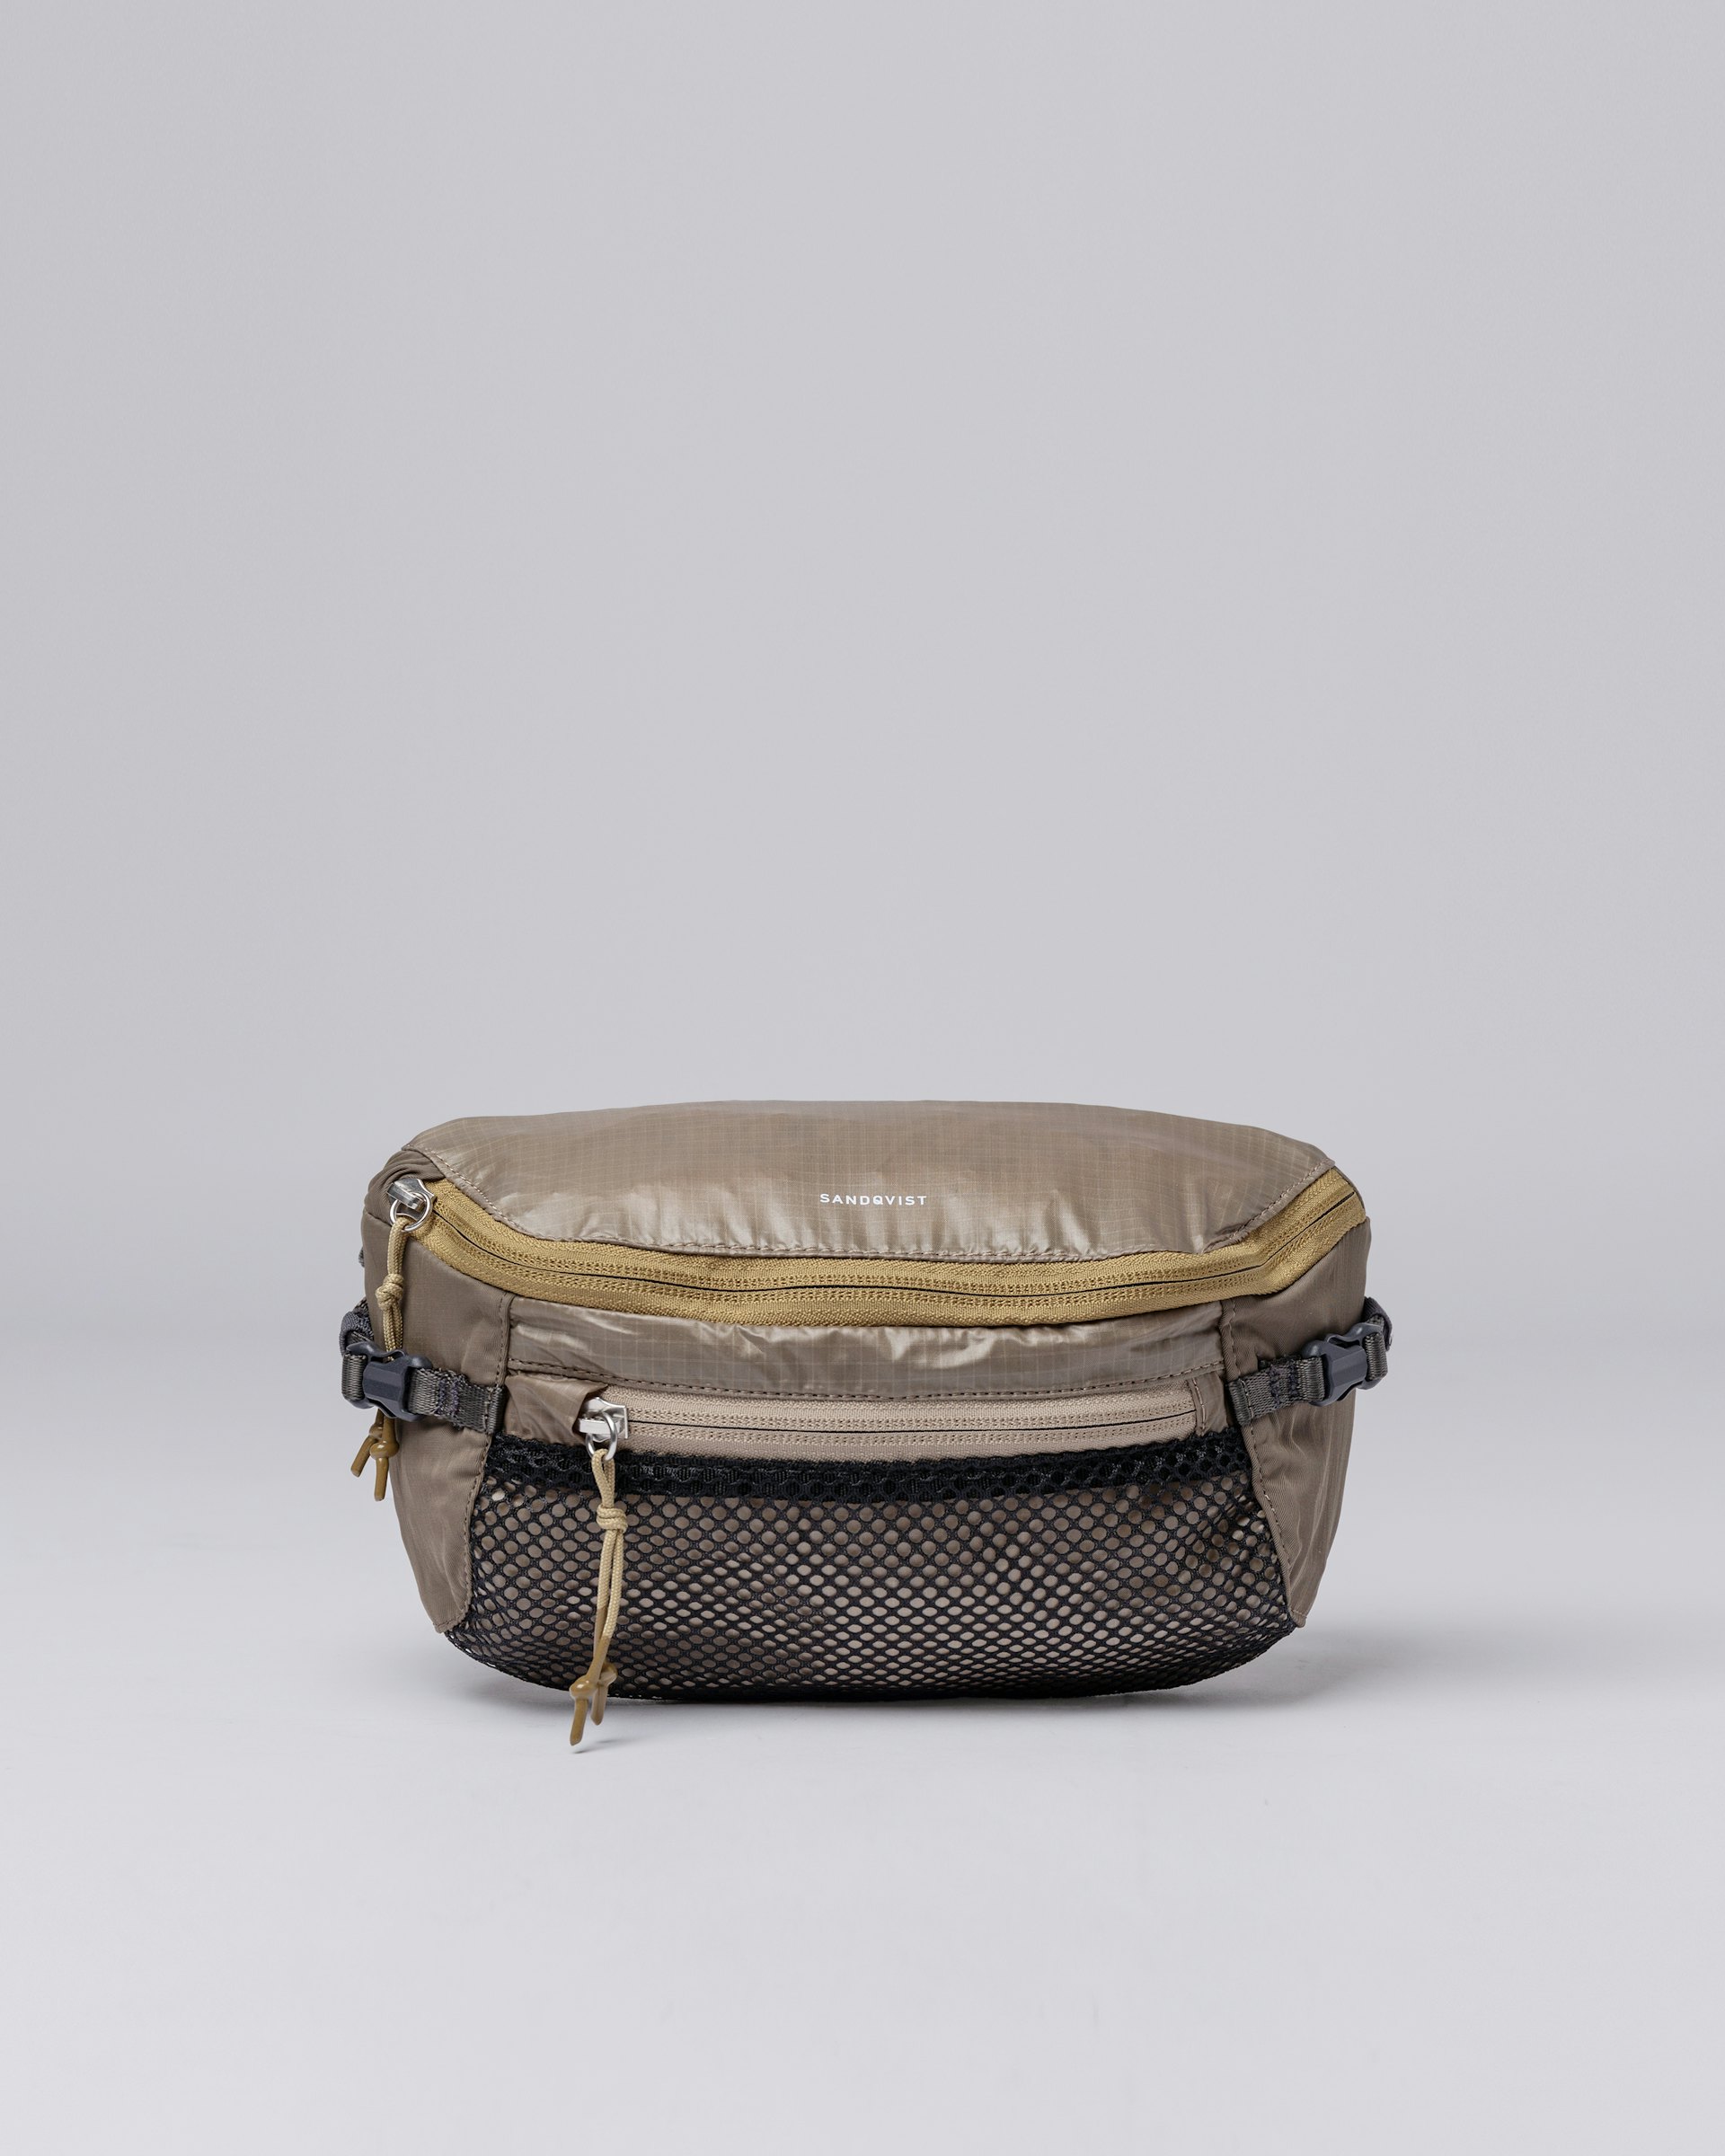 Lo belongs to the category Shoulder bags and is in color multi fog light (1 of 6)